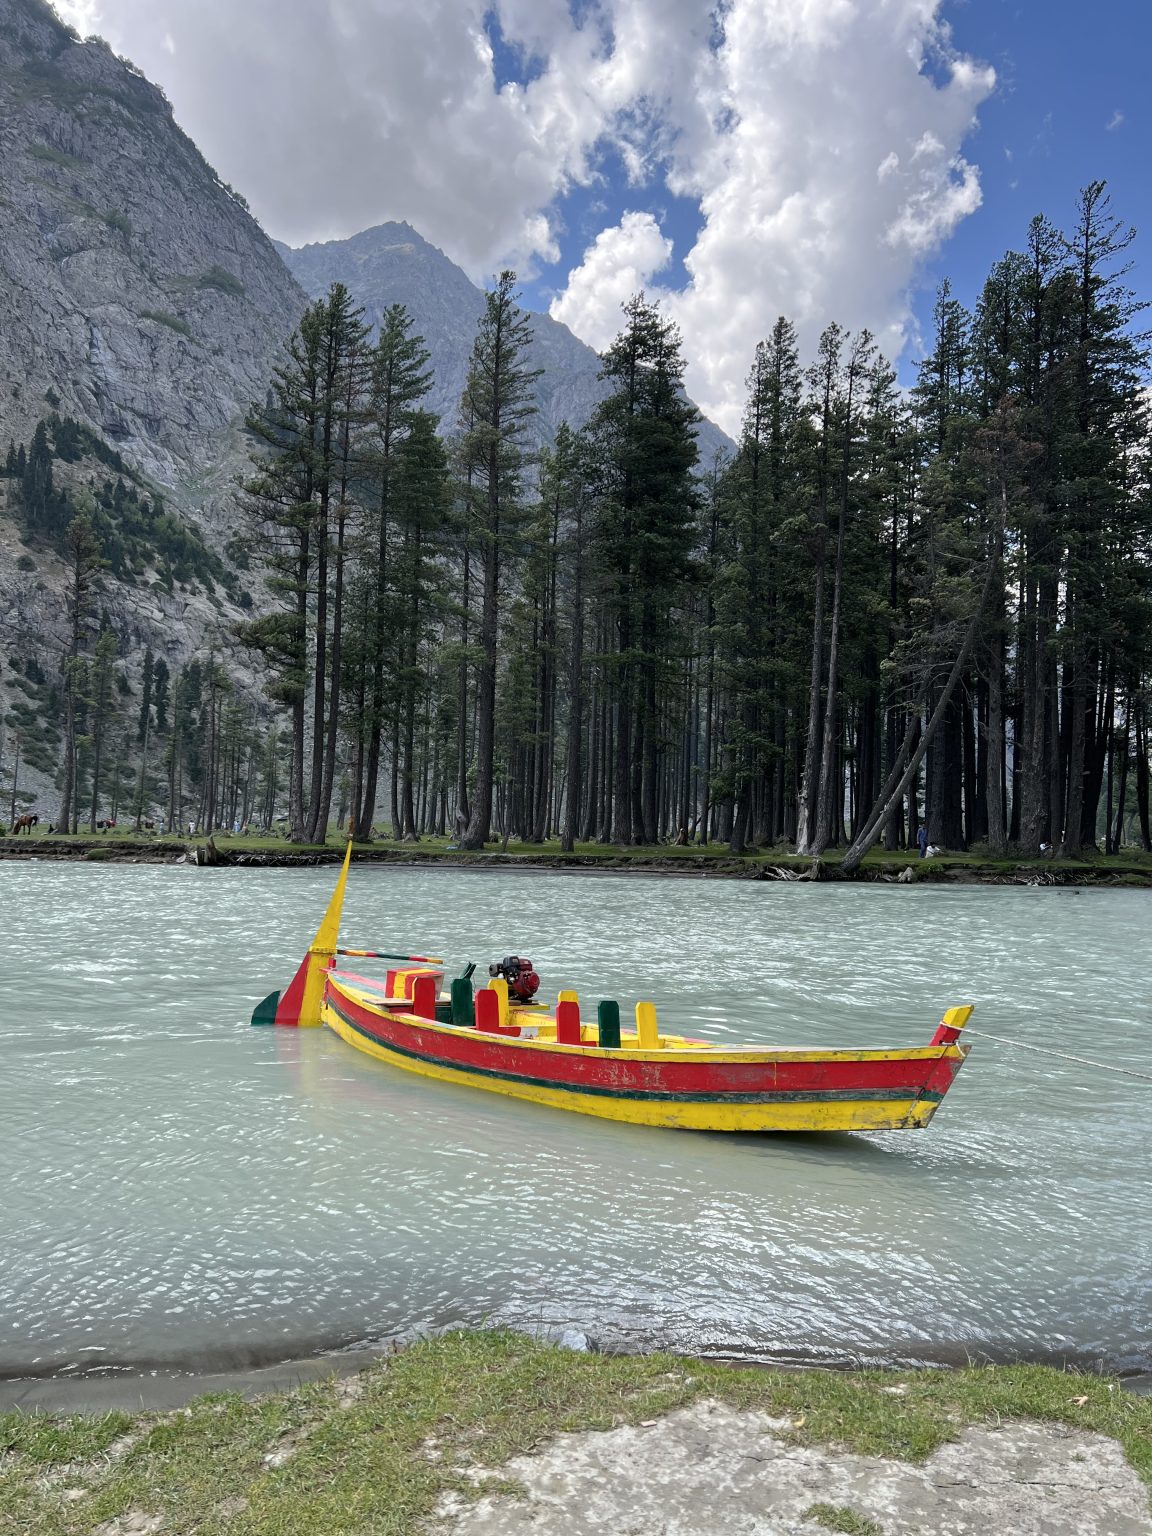 A small boat on Lake Mahodand with forest and mountain scenery behind. Kalam, Pakistan. Photo contributed by Muhammad Shakeel to the WordPress Photo Directory.